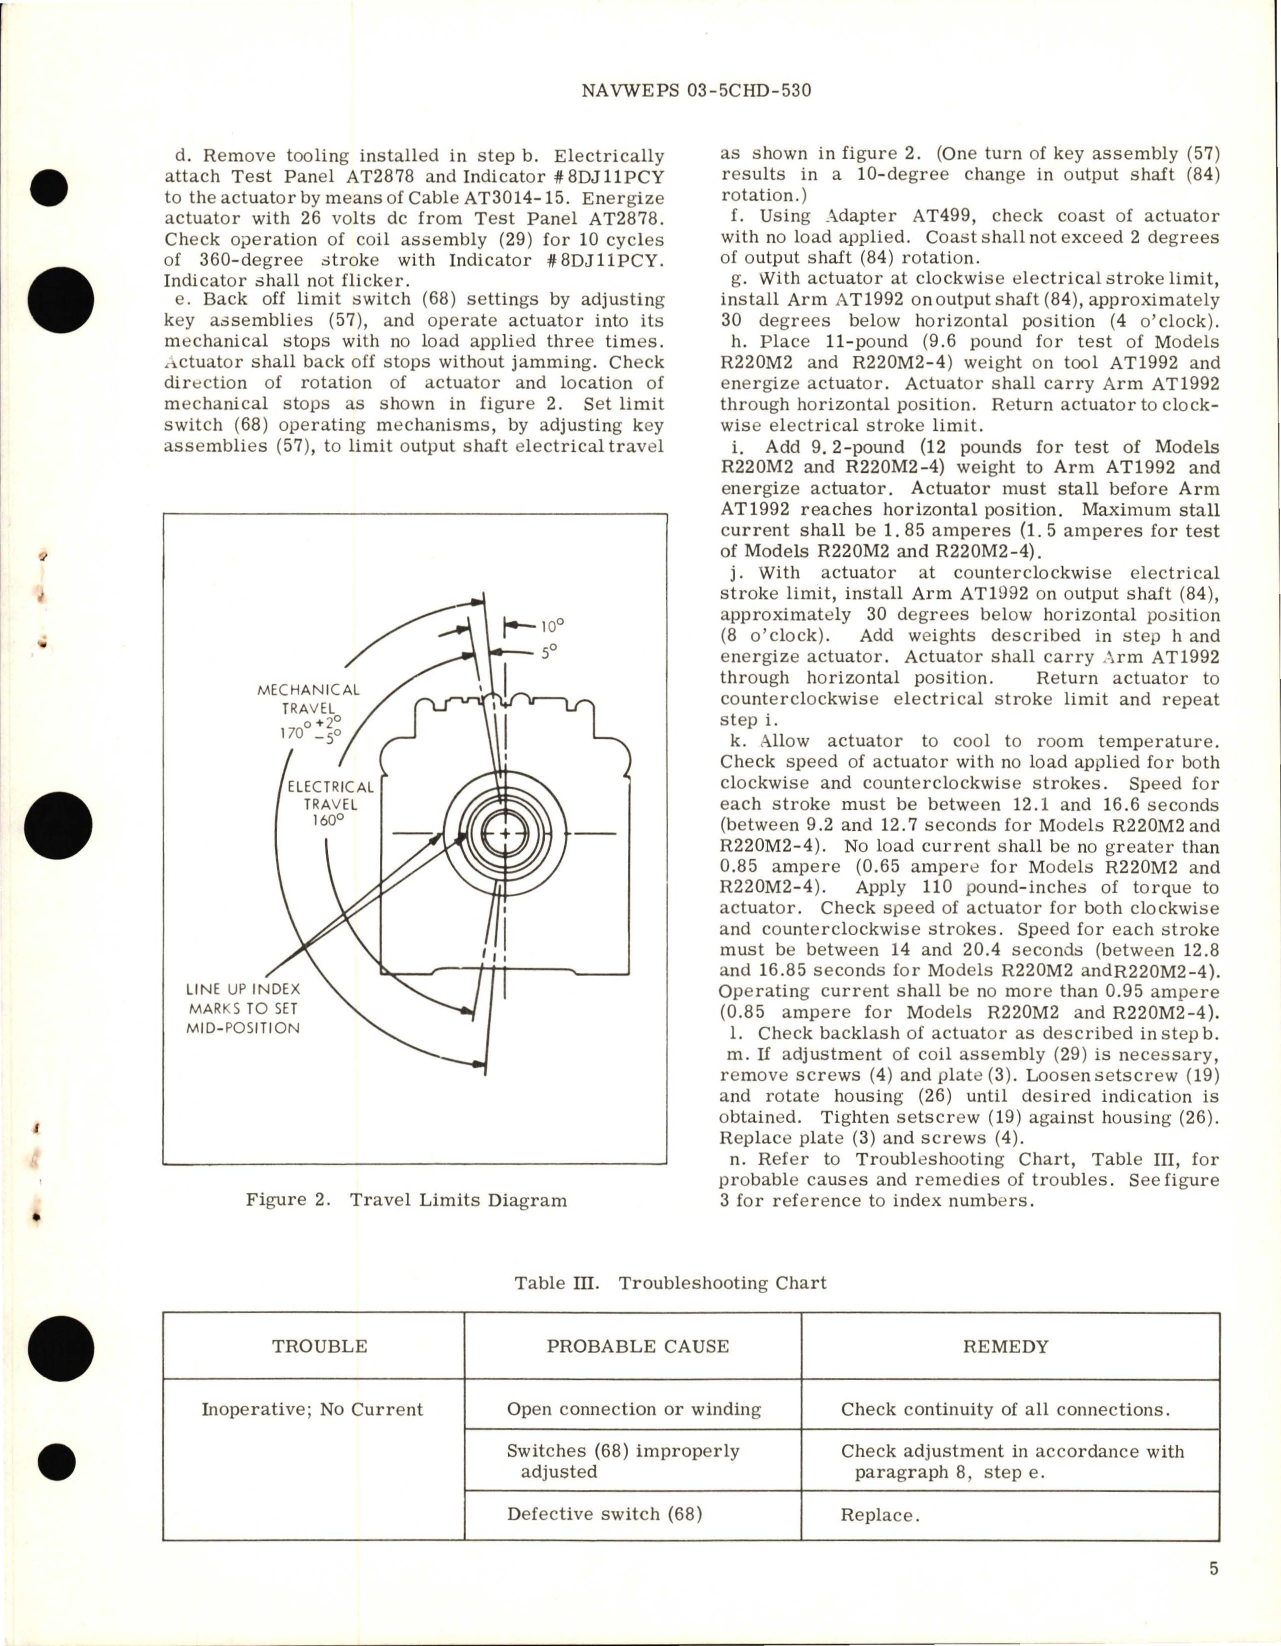 Sample page 5 from AirCorps Library document: Overhaul Instruments with Parts Breakdown for Electro-Mechanical Rotary Actuator Models R220M2, R220M2-4, and R220M2-5  